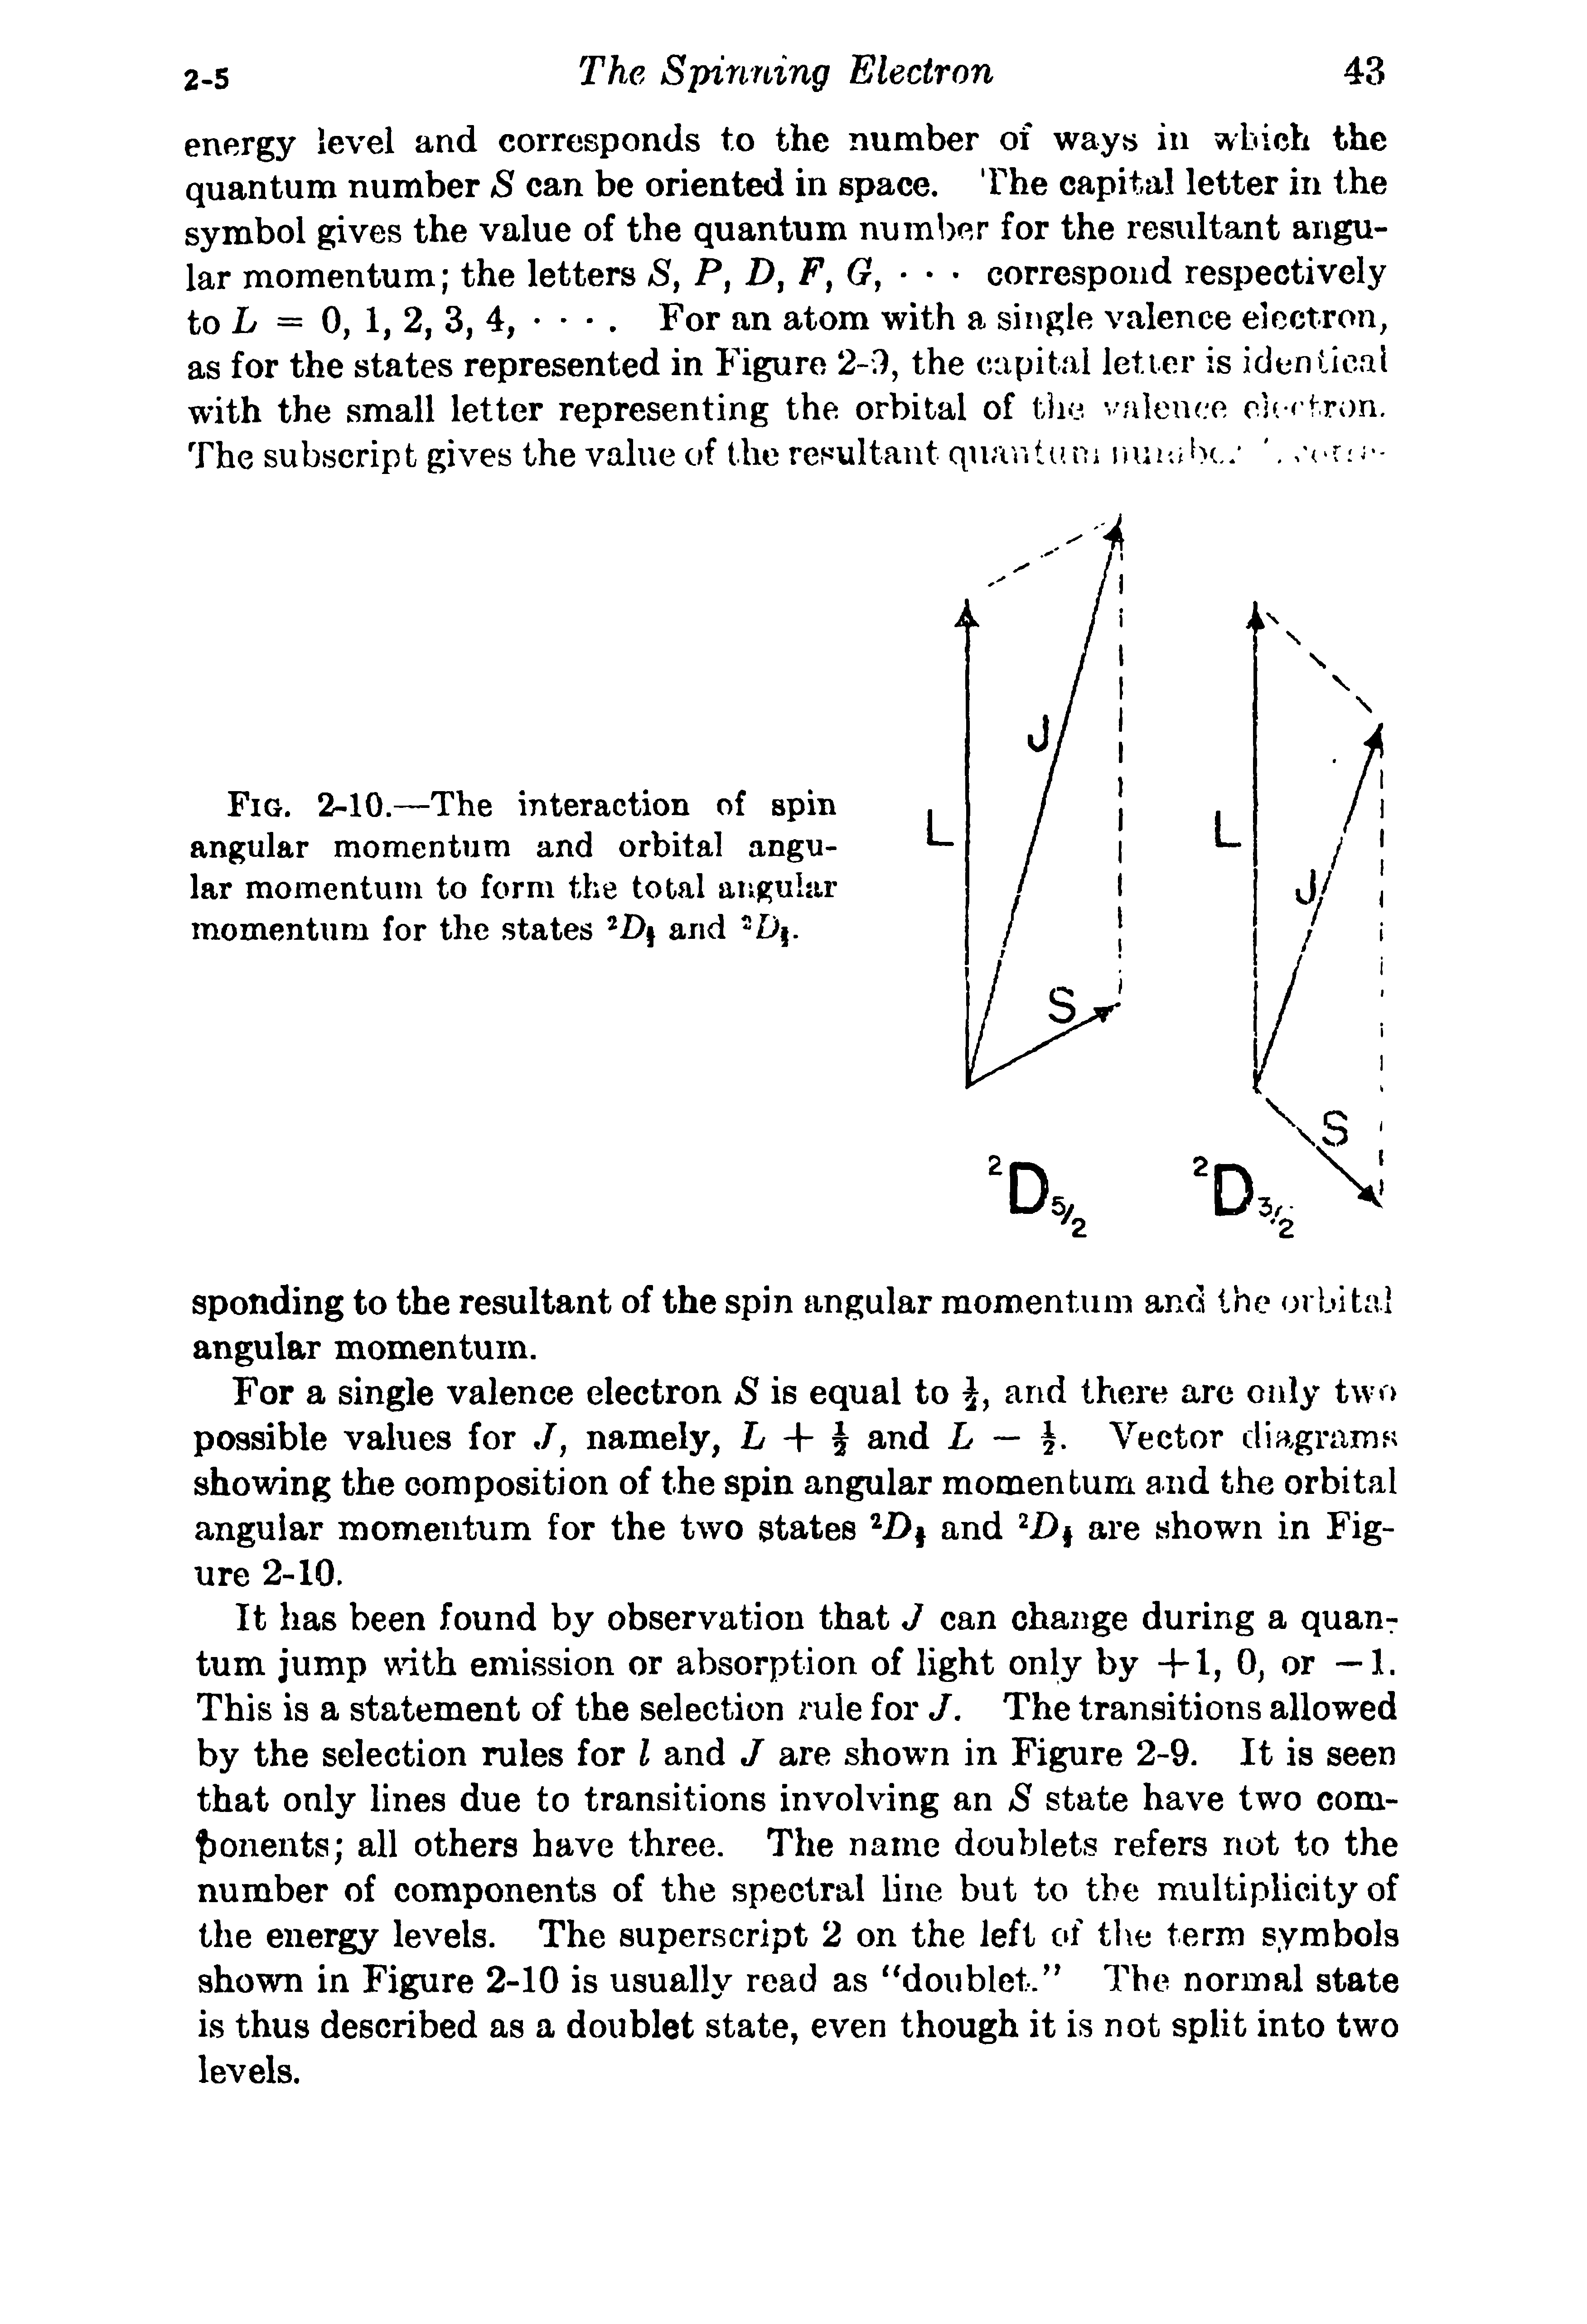 Fig. 2-10.—The interaction of Bpin angular momentum and orbital angular momentum to form the total angular momentum for the states 2Z>j and 2D .